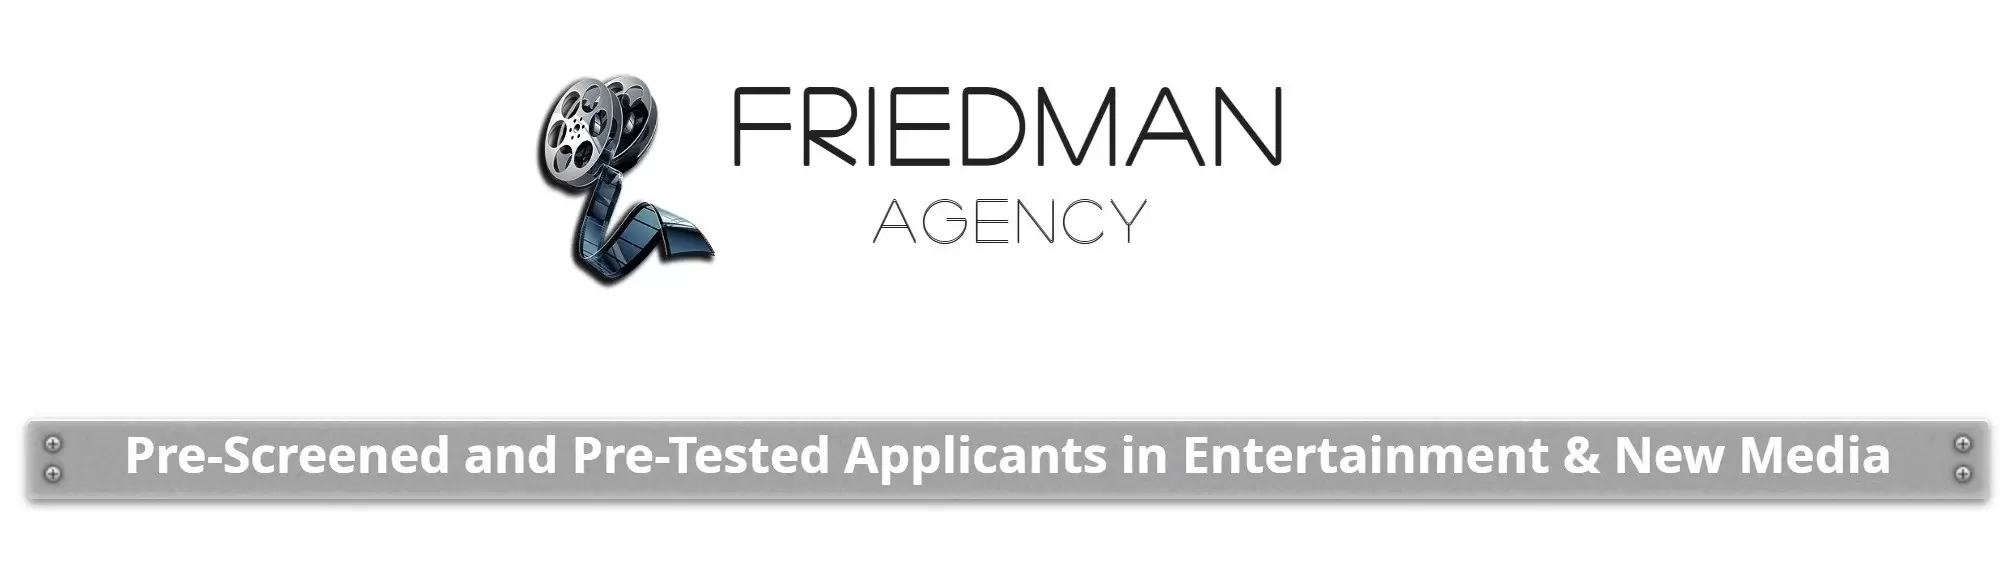 Friedman Personnel Agency: Company Profile & Reviews